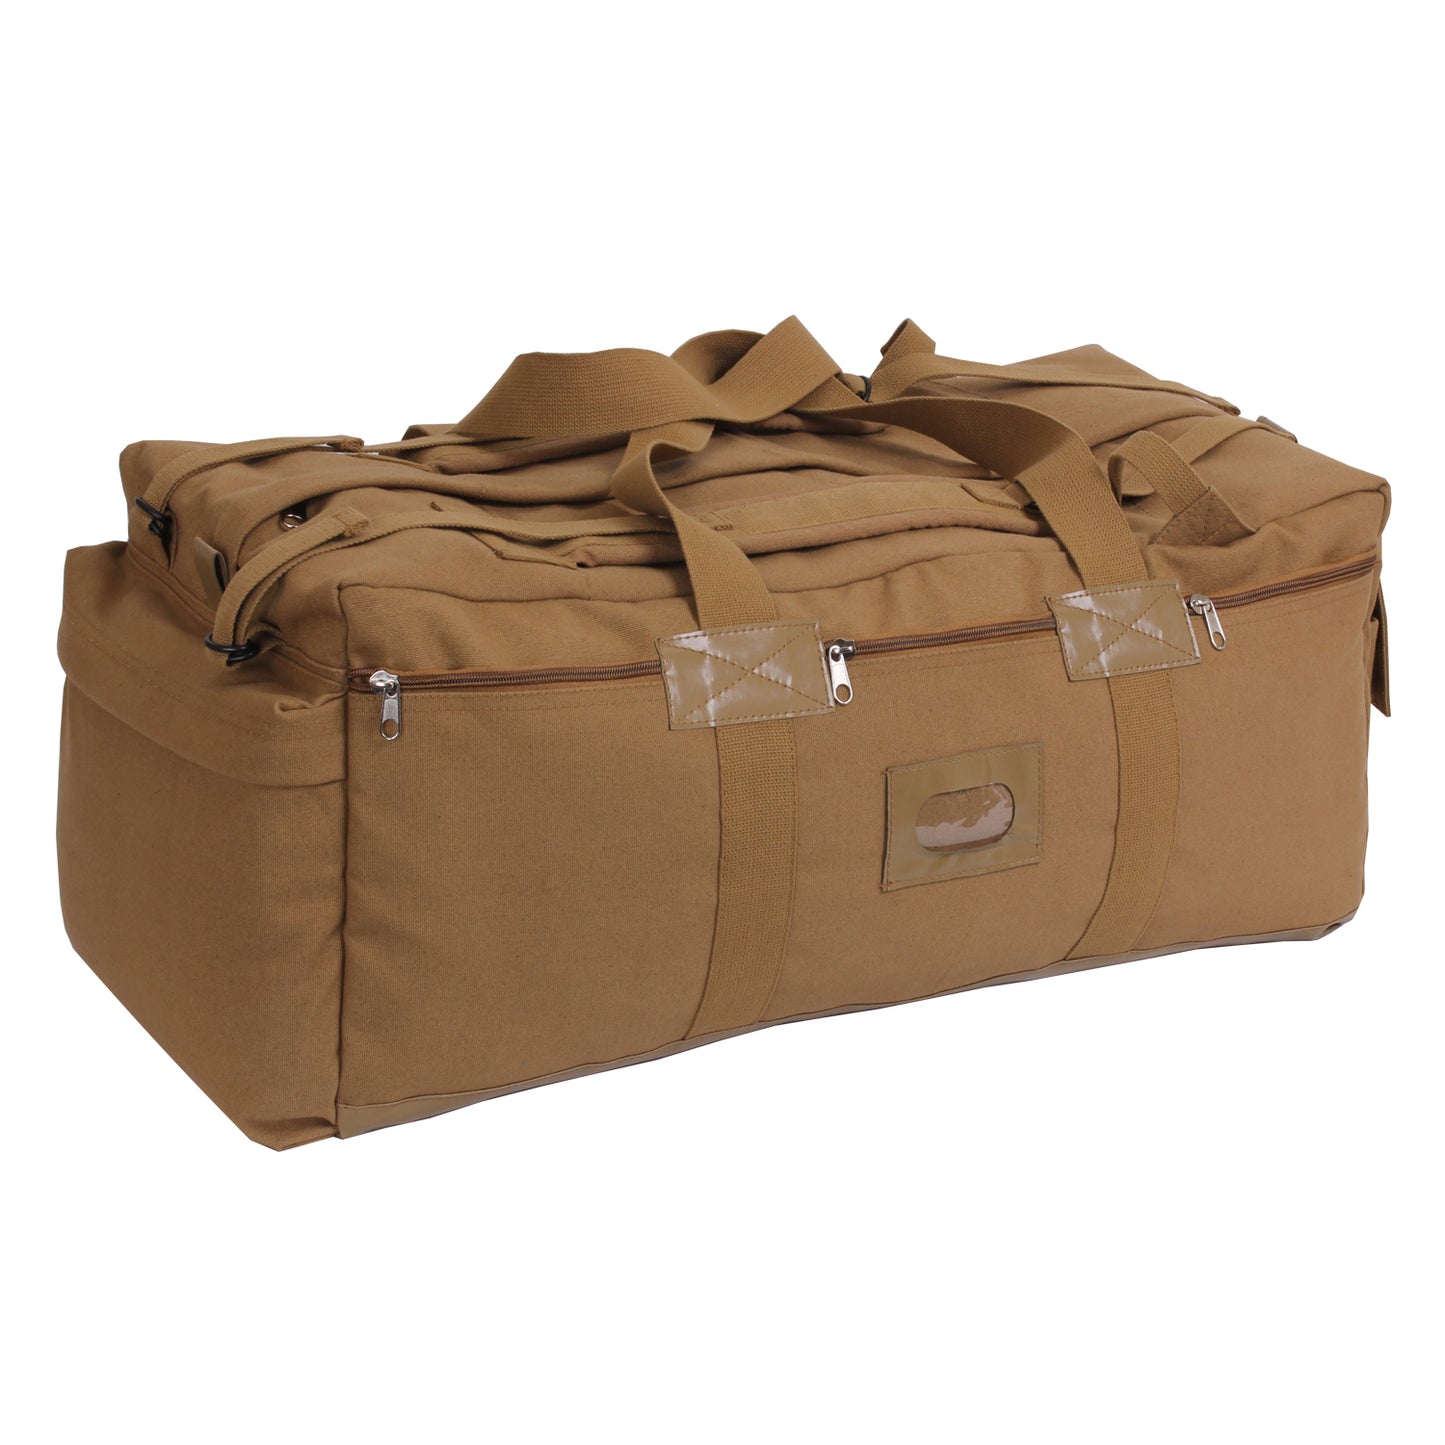 Rothco Coyote Brown Mossad Tactical Duffle Bag - Large 34" Canvas